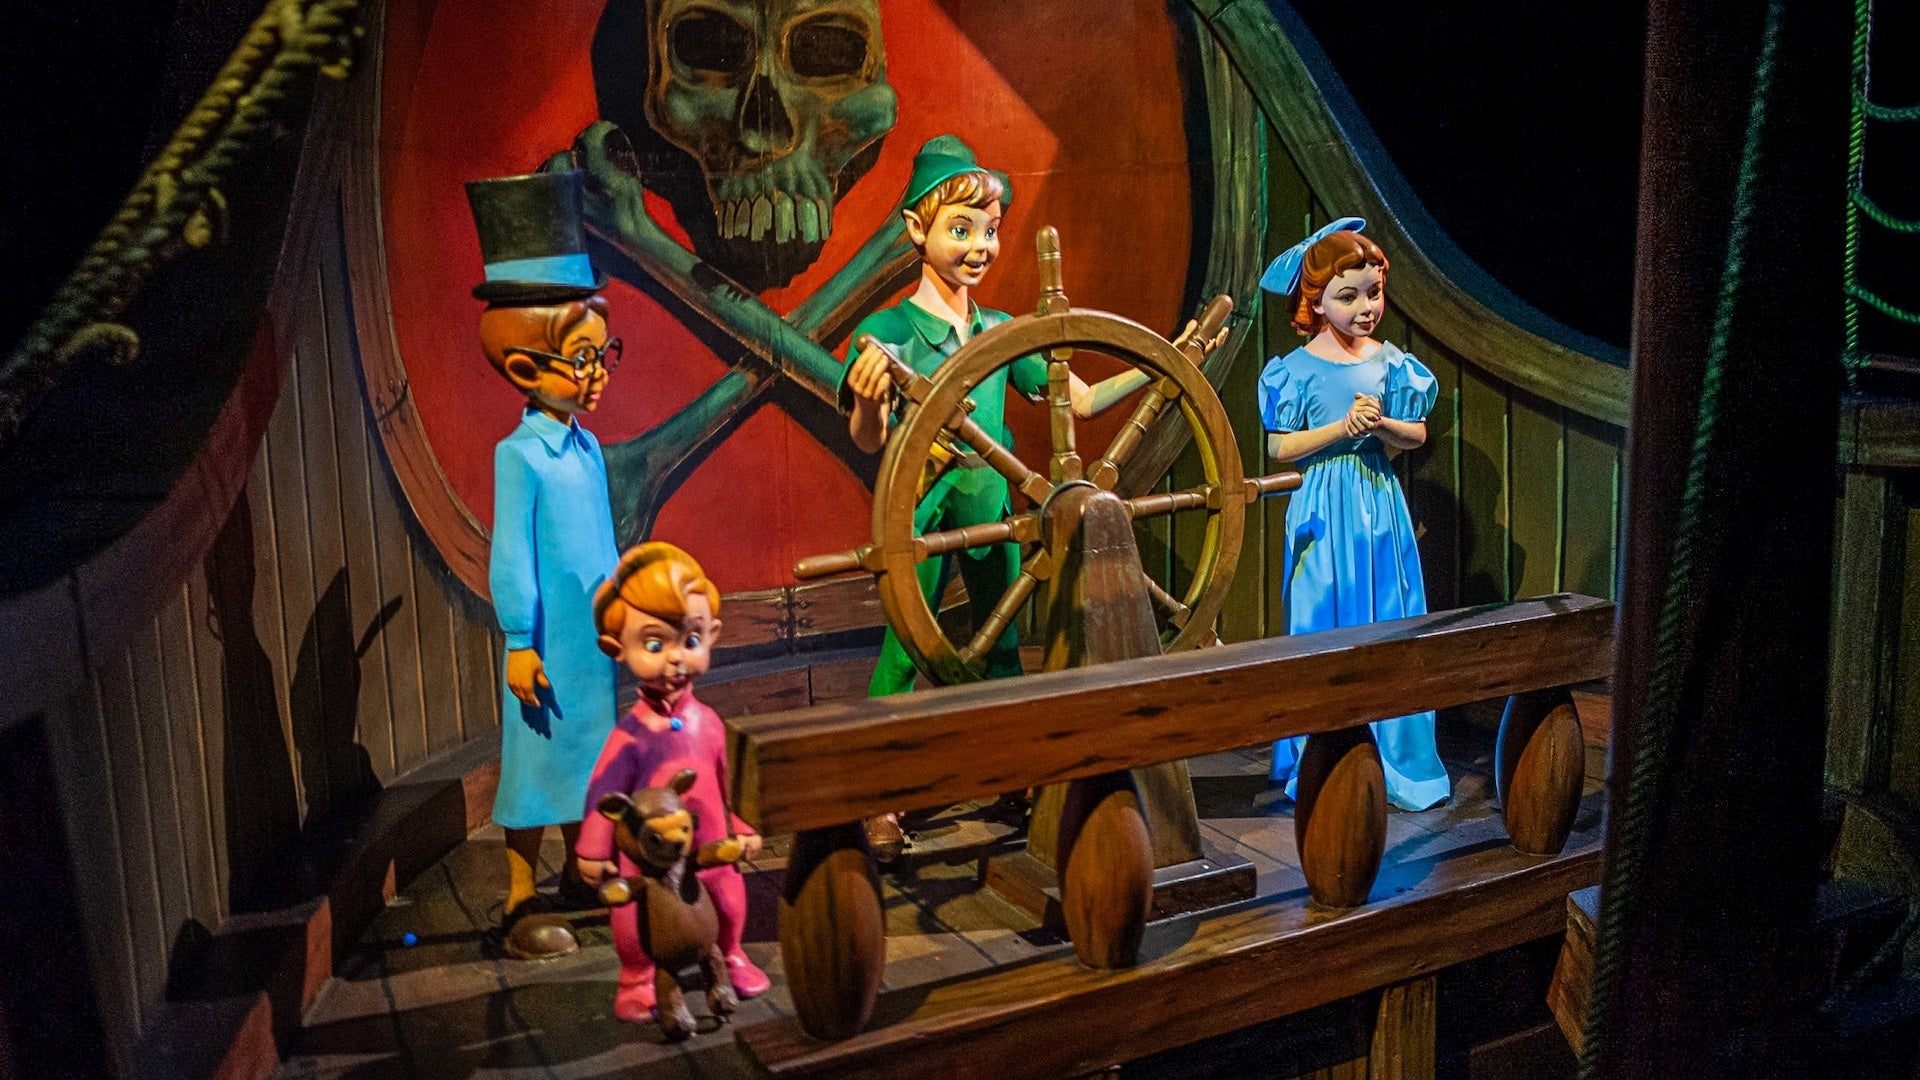 Interior shot of several Peter pan characters standing on a boat